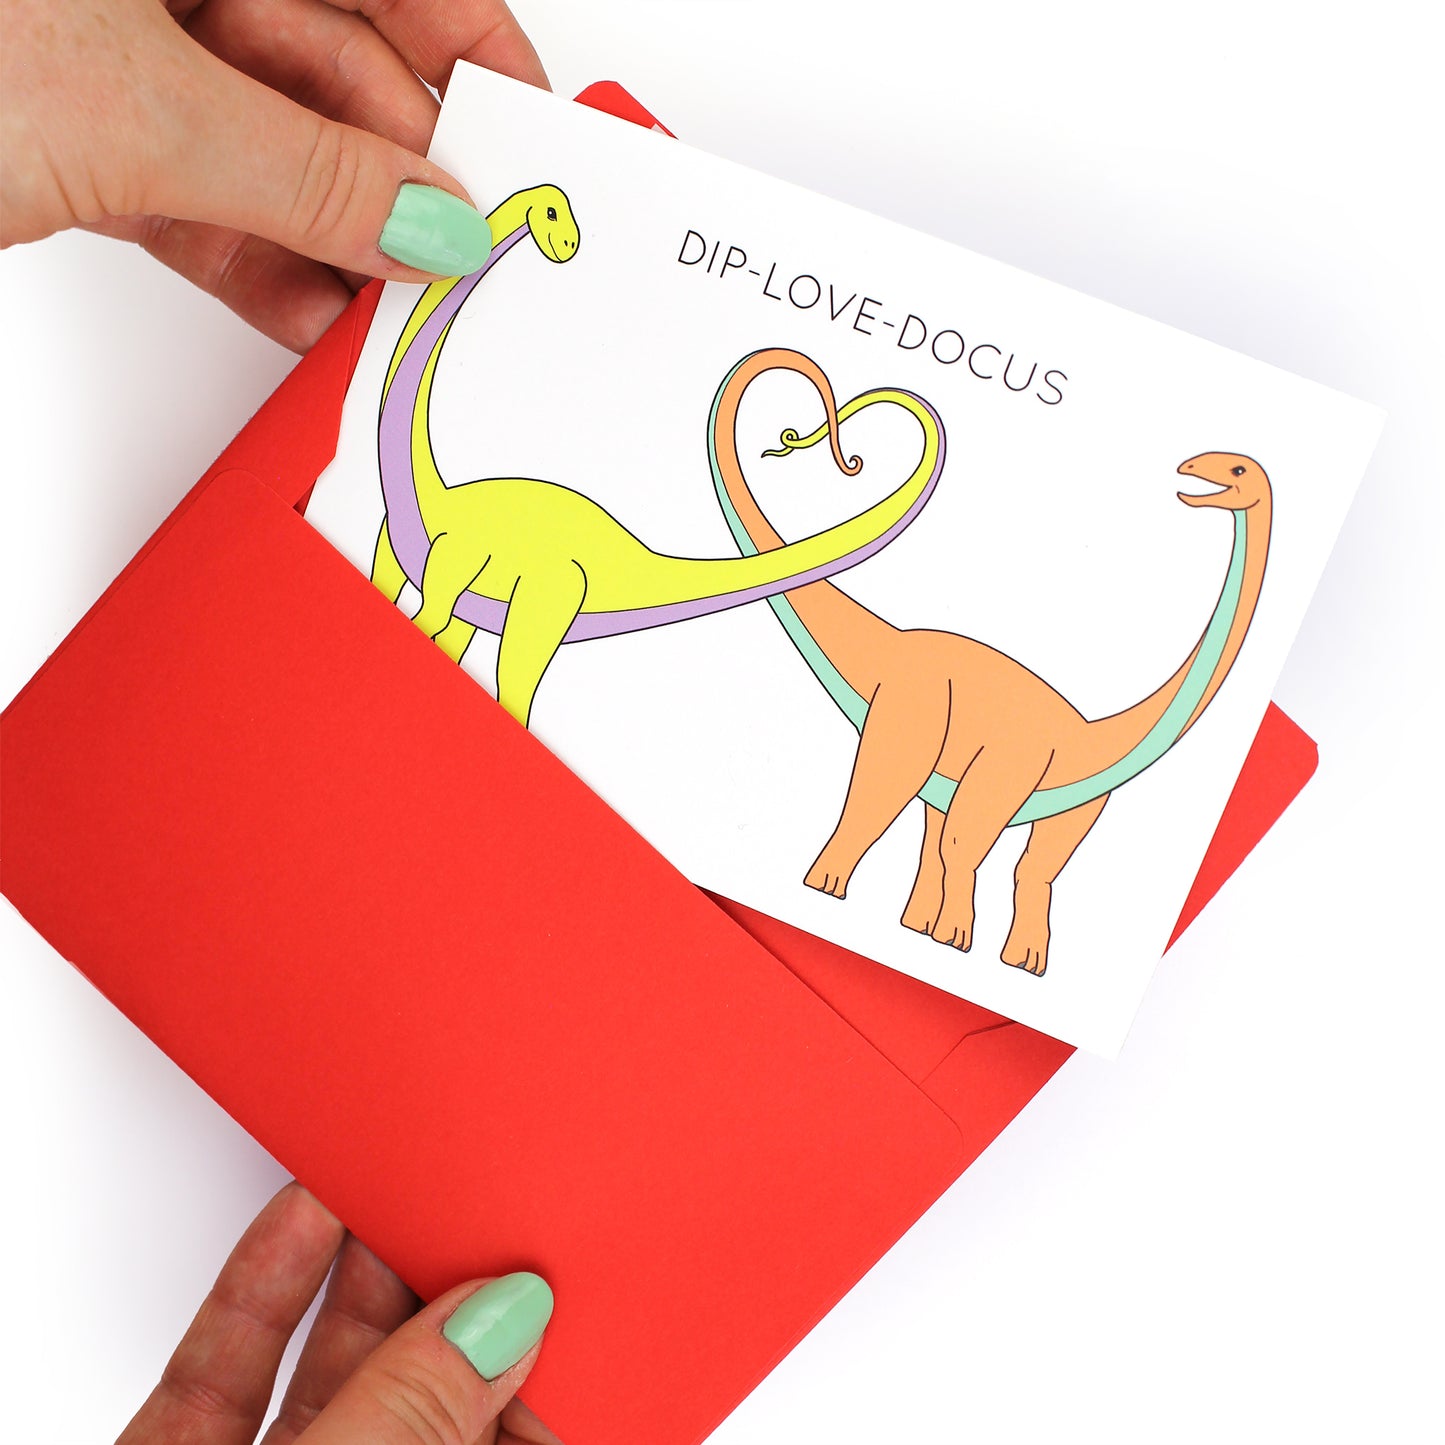 hands holding an envelope while removing the dip-love-docus dinosaur card from the envelope